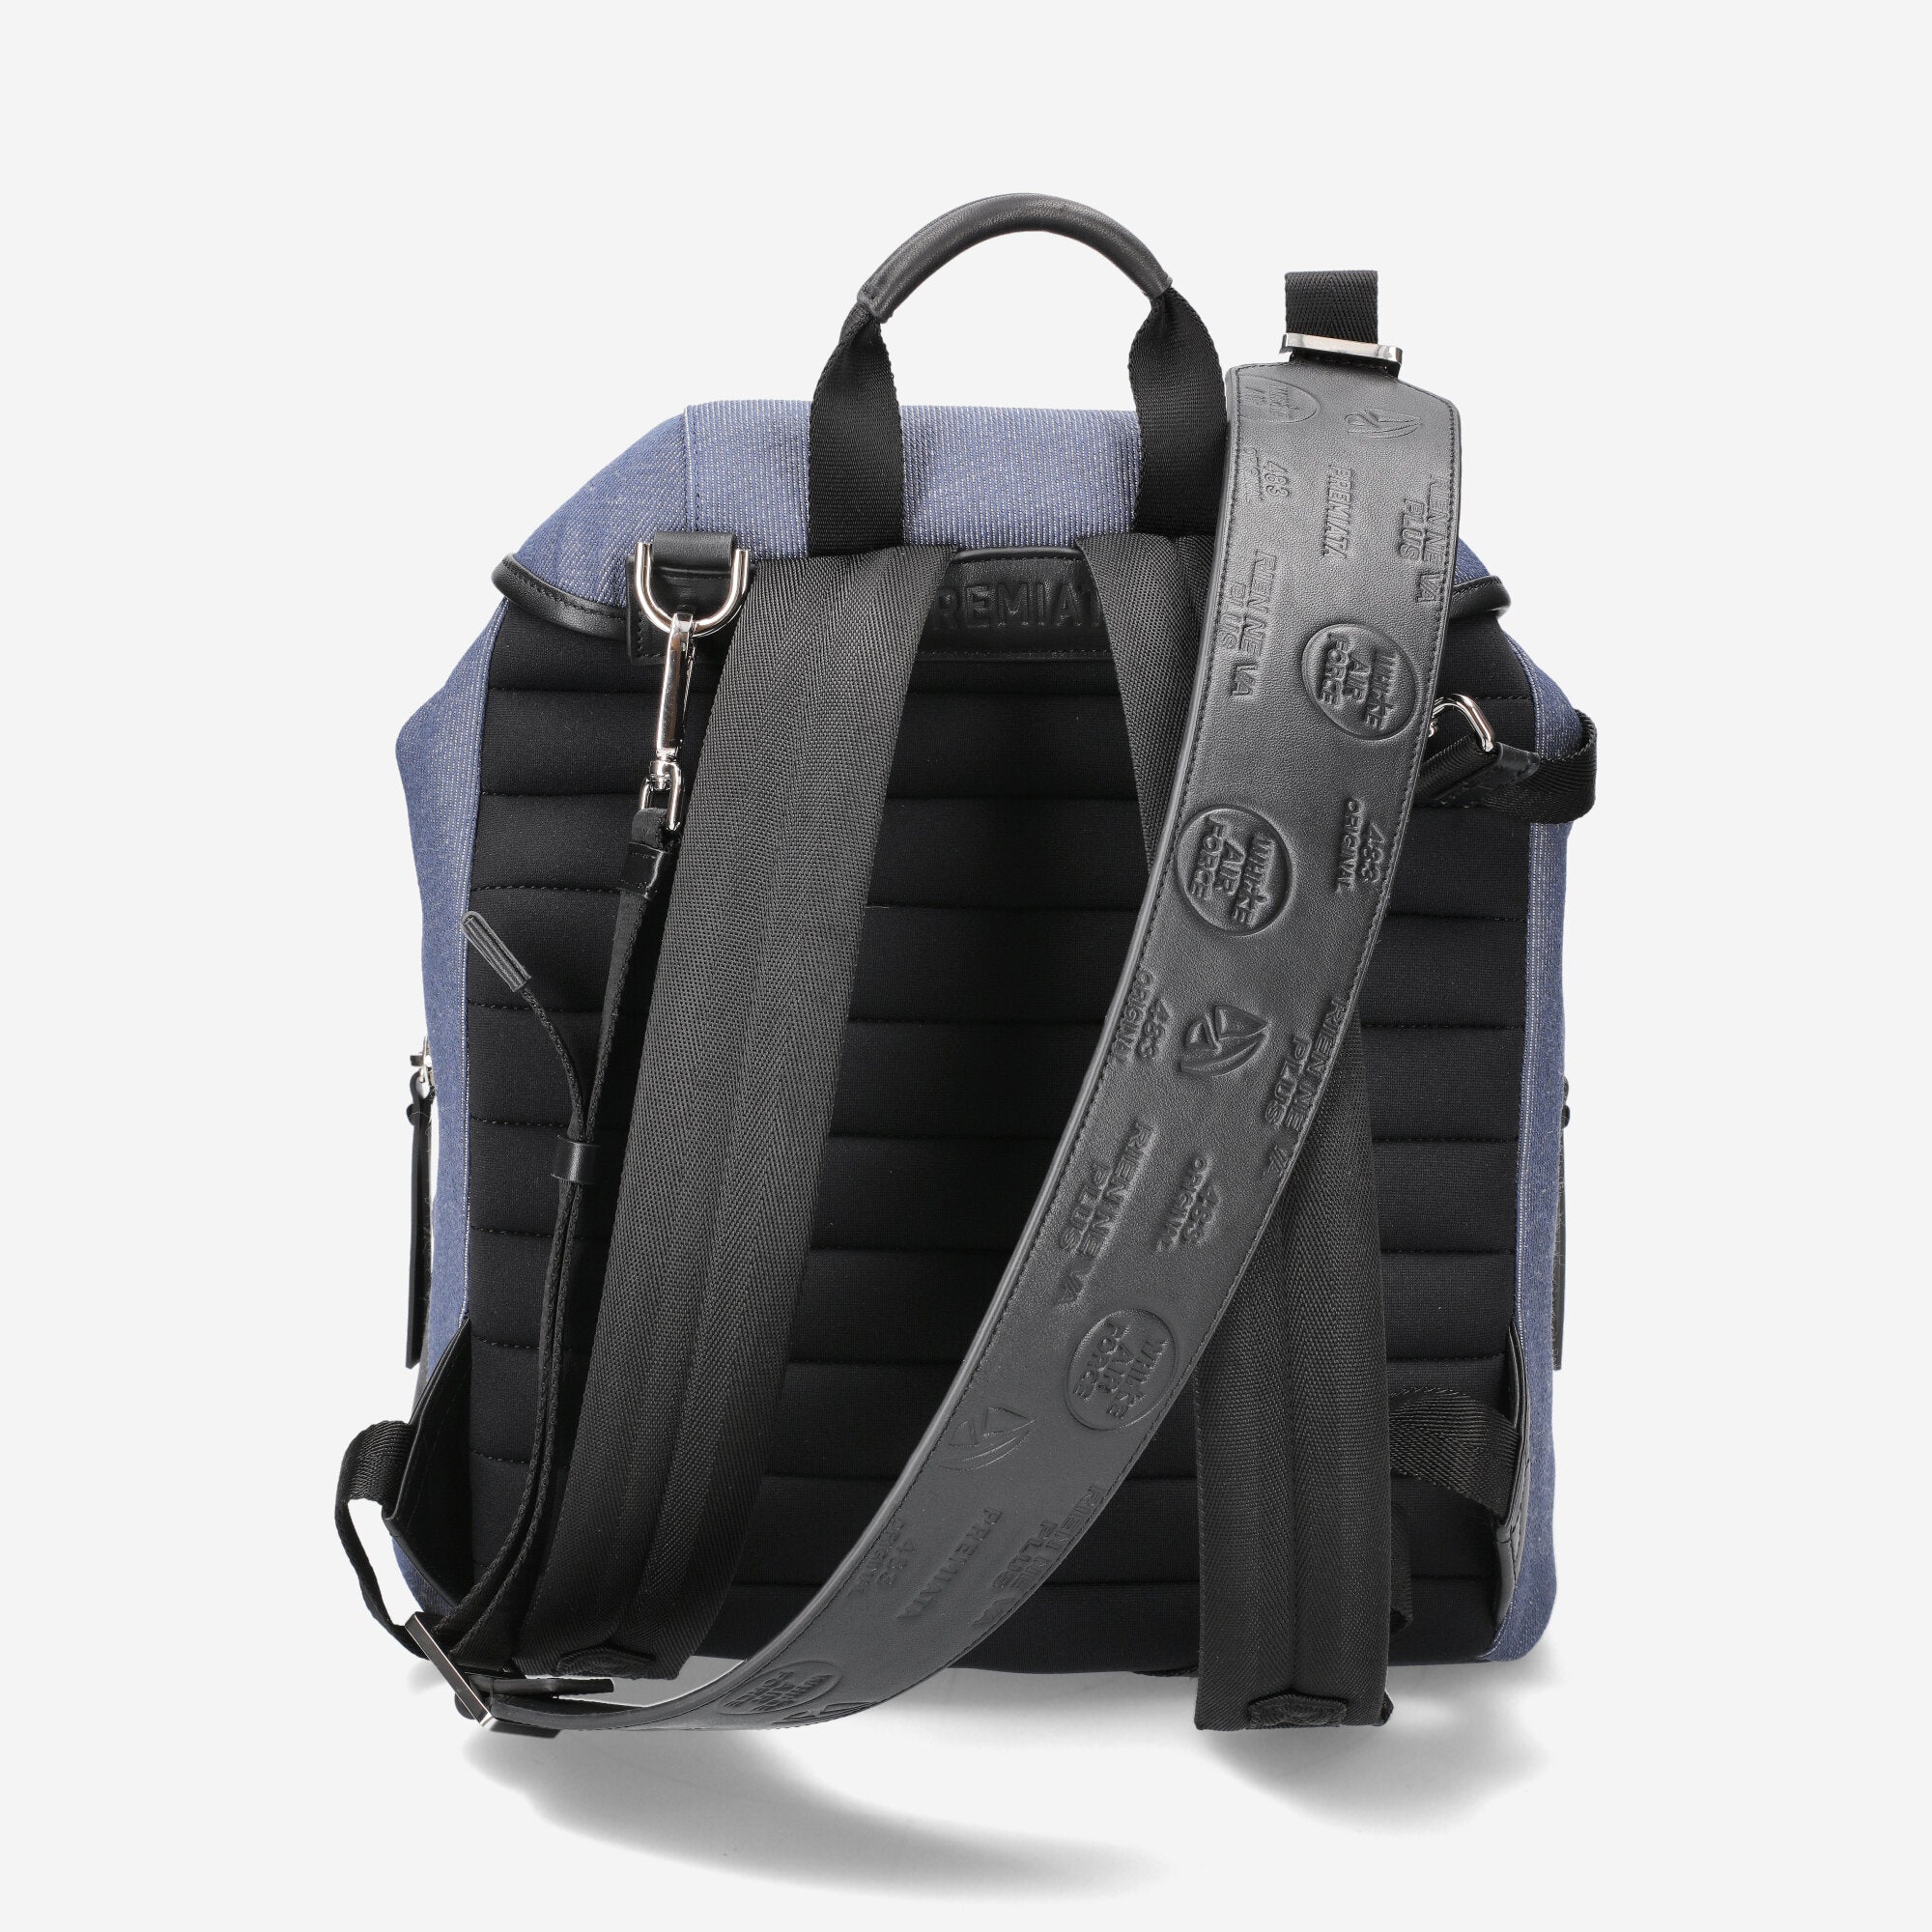 Lyn Premiata's Navy Nylon and Leather Lined Backpack